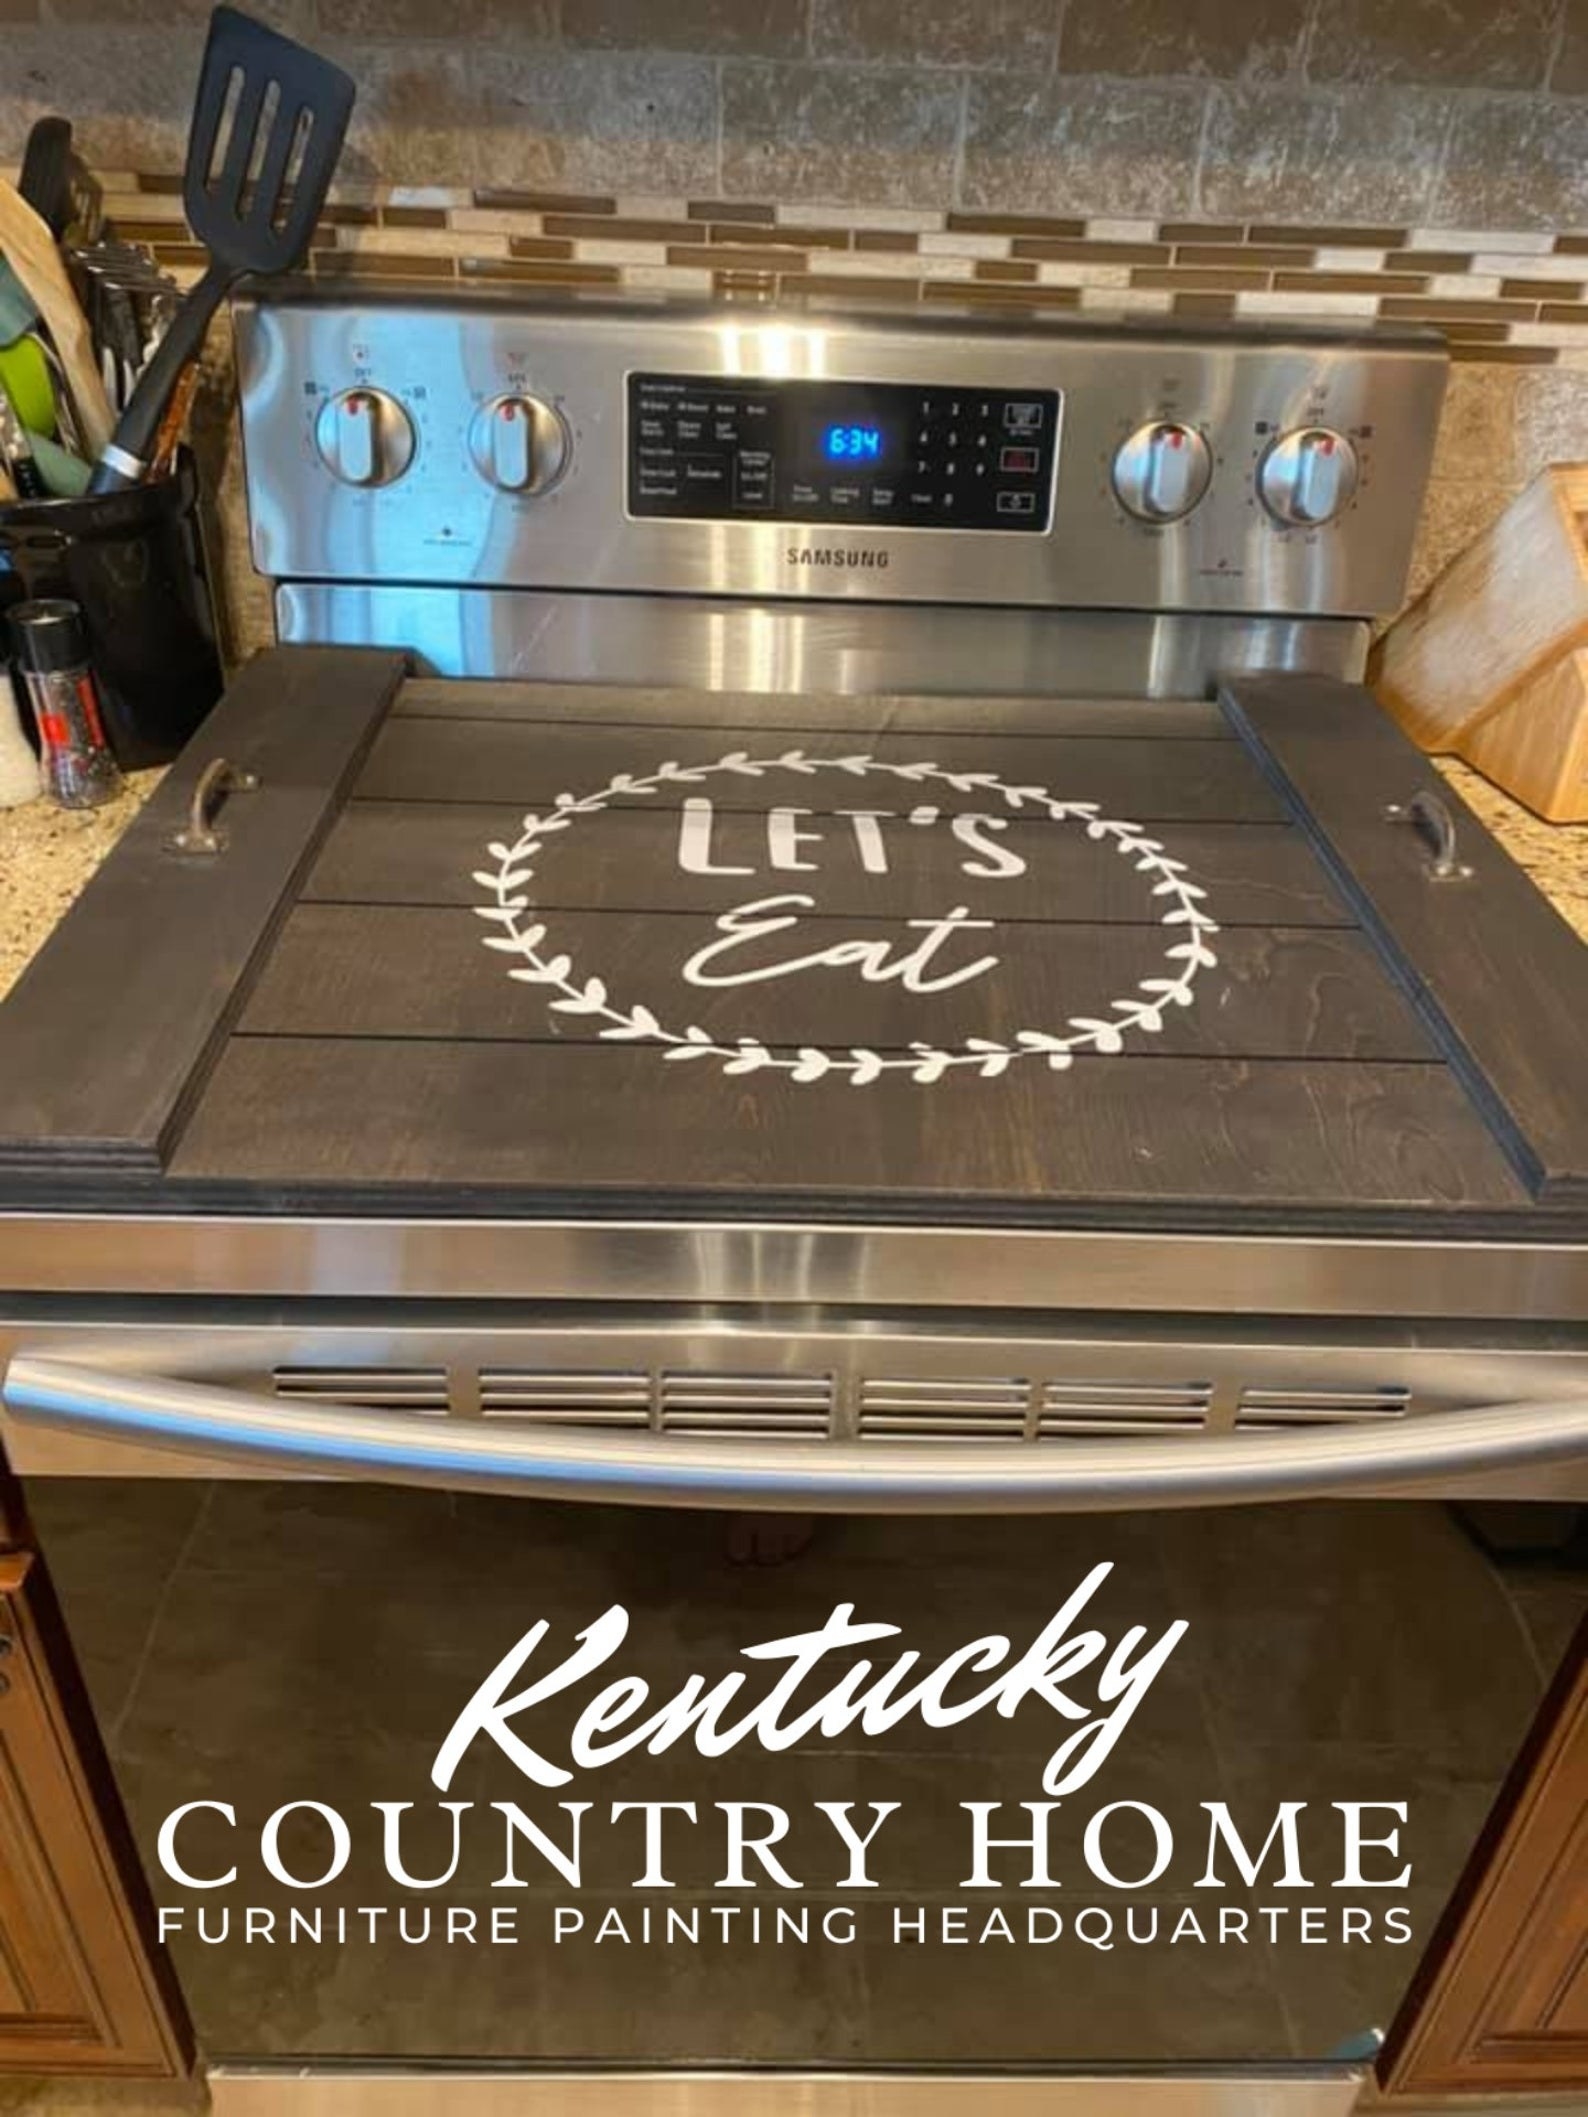 Personalized wood stove cover placed over stove top